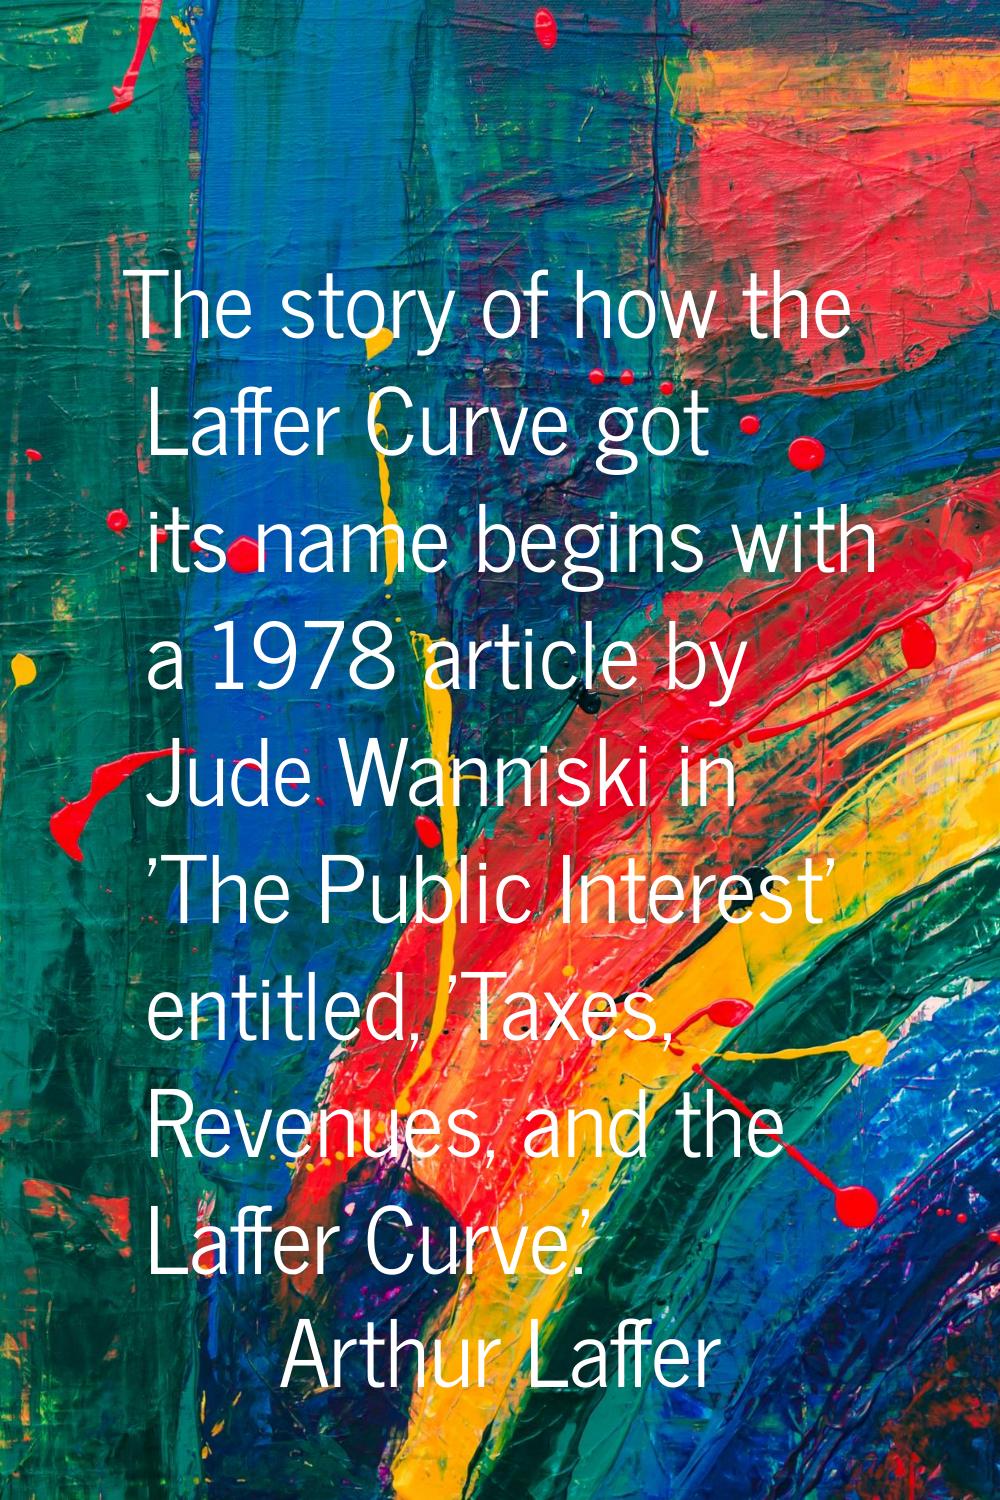 The story of how the Laffer Curve got its name begins with a 1978 article by Jude Wanniski in 'The 